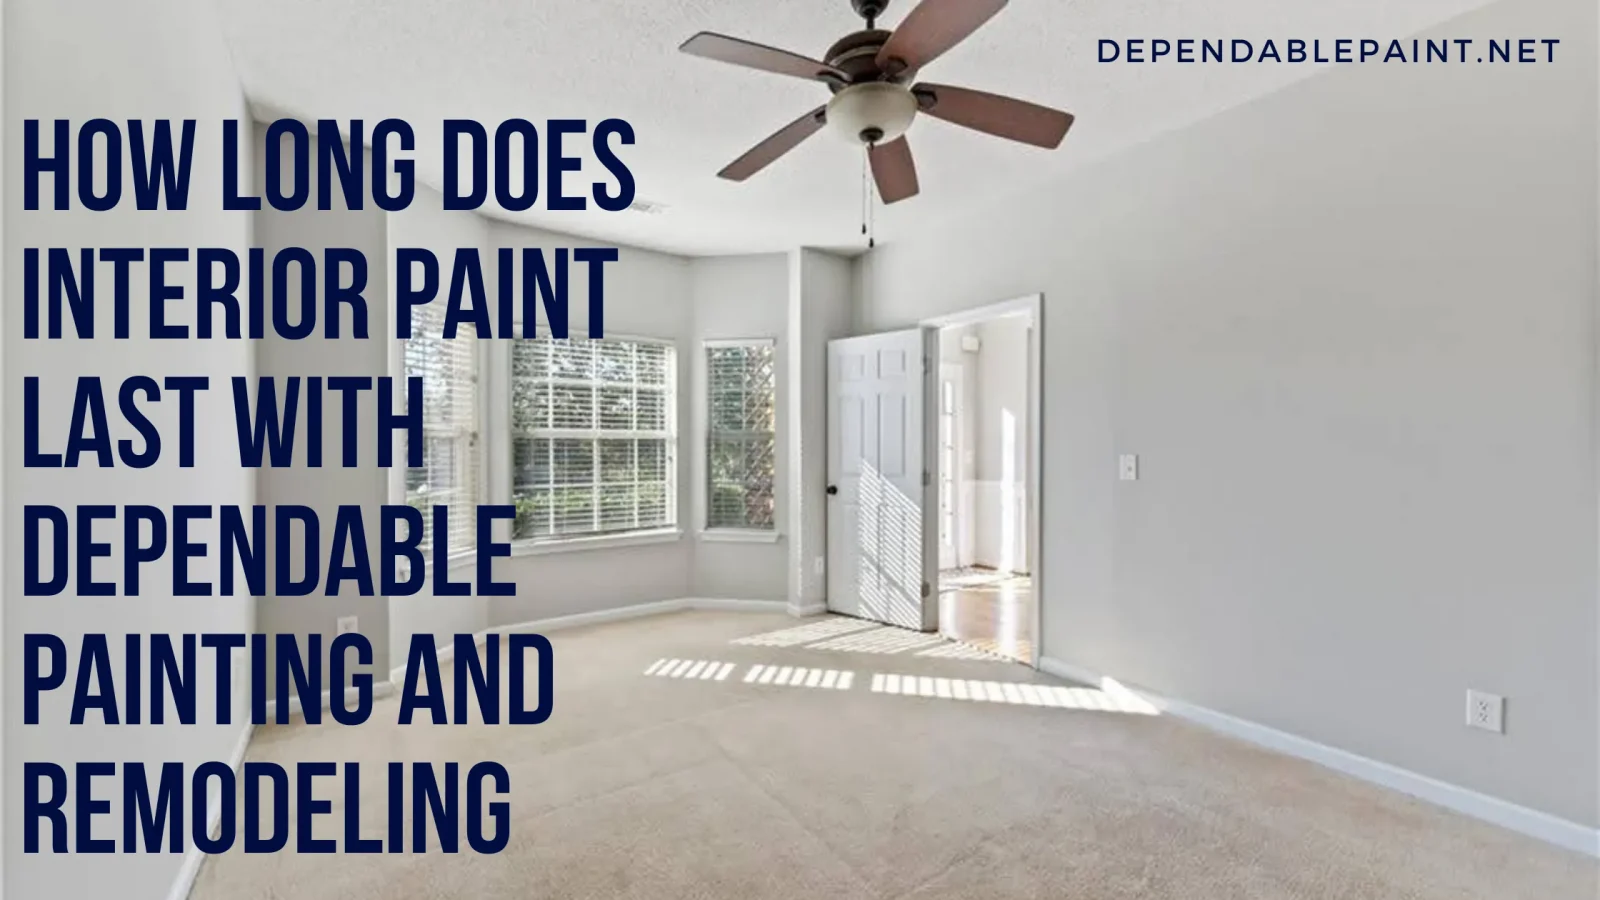 How Long Does Interior Paint Last With Dependable Painting and Remodeling